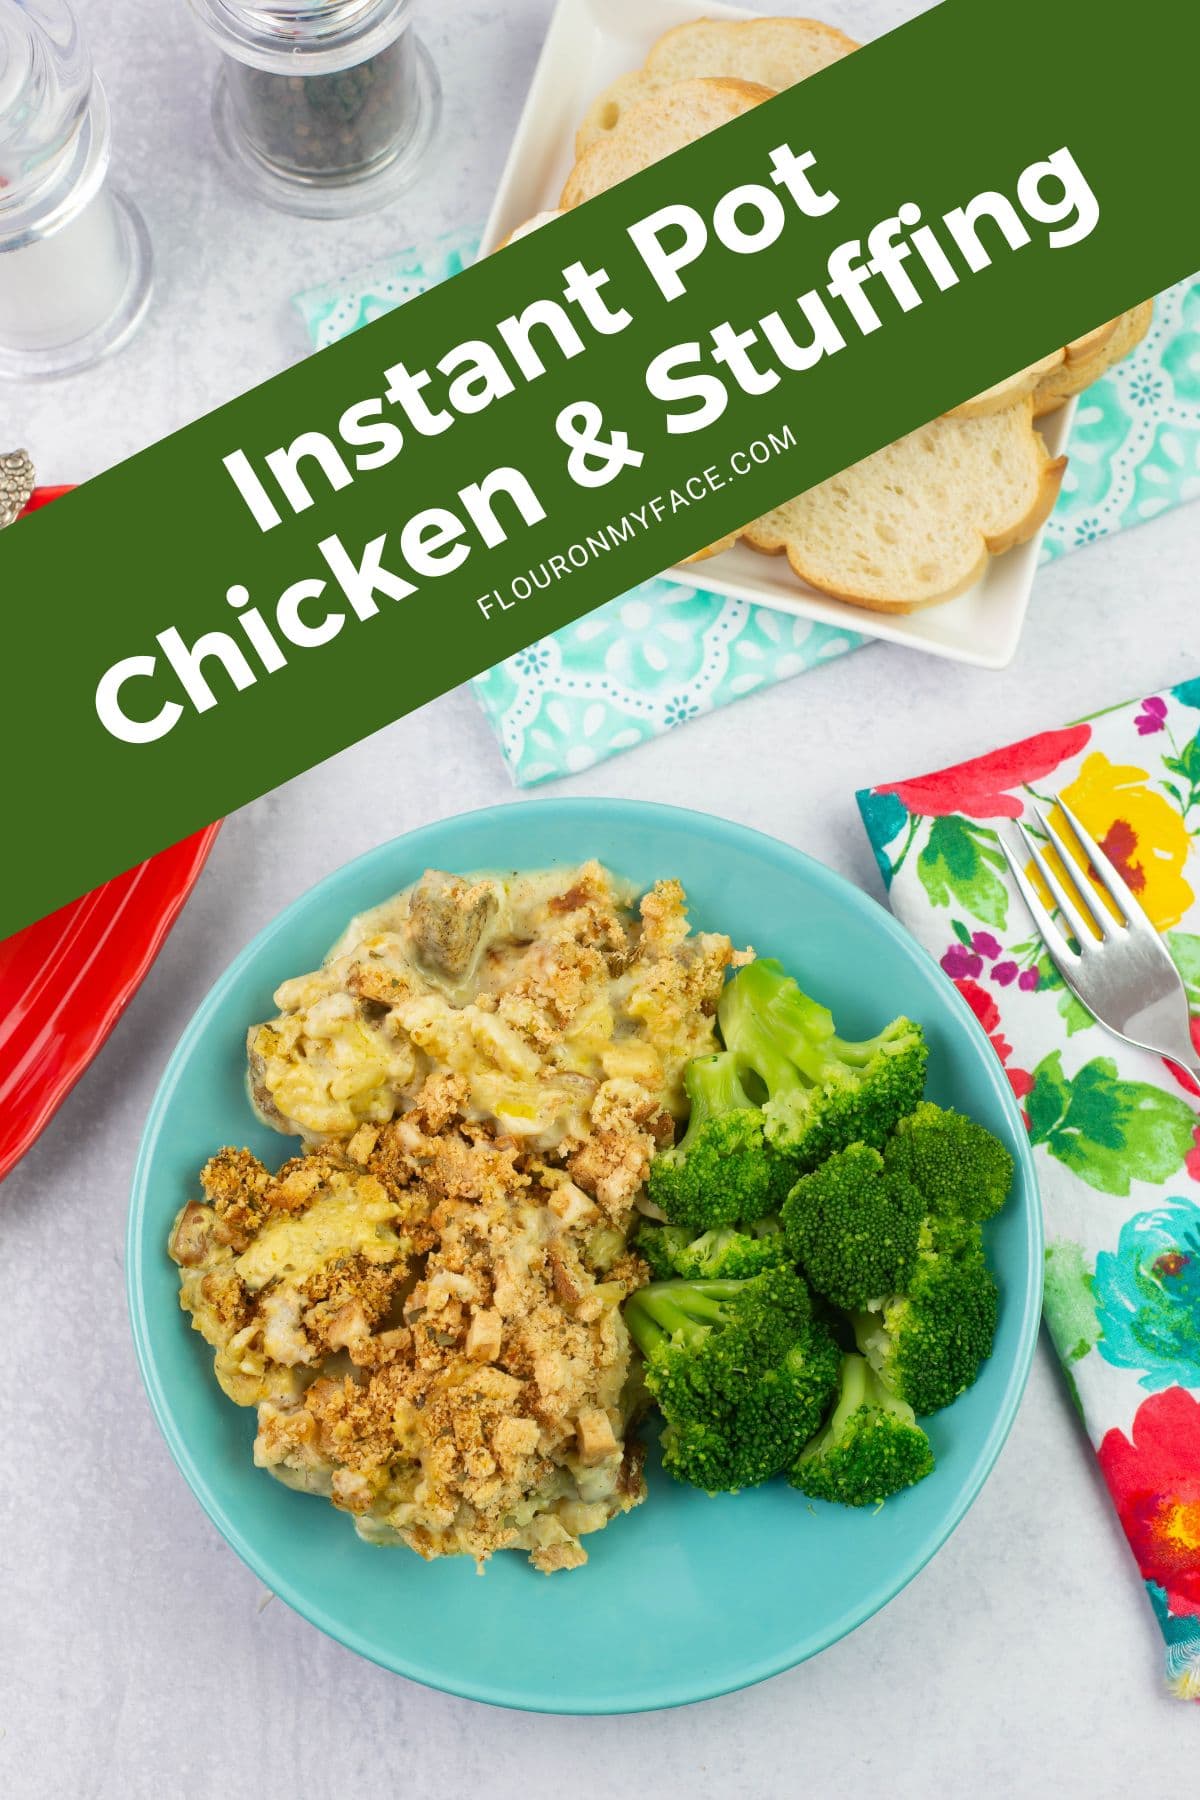 Instant Pot Chicken and Stuffing in a bowl with broccoli.